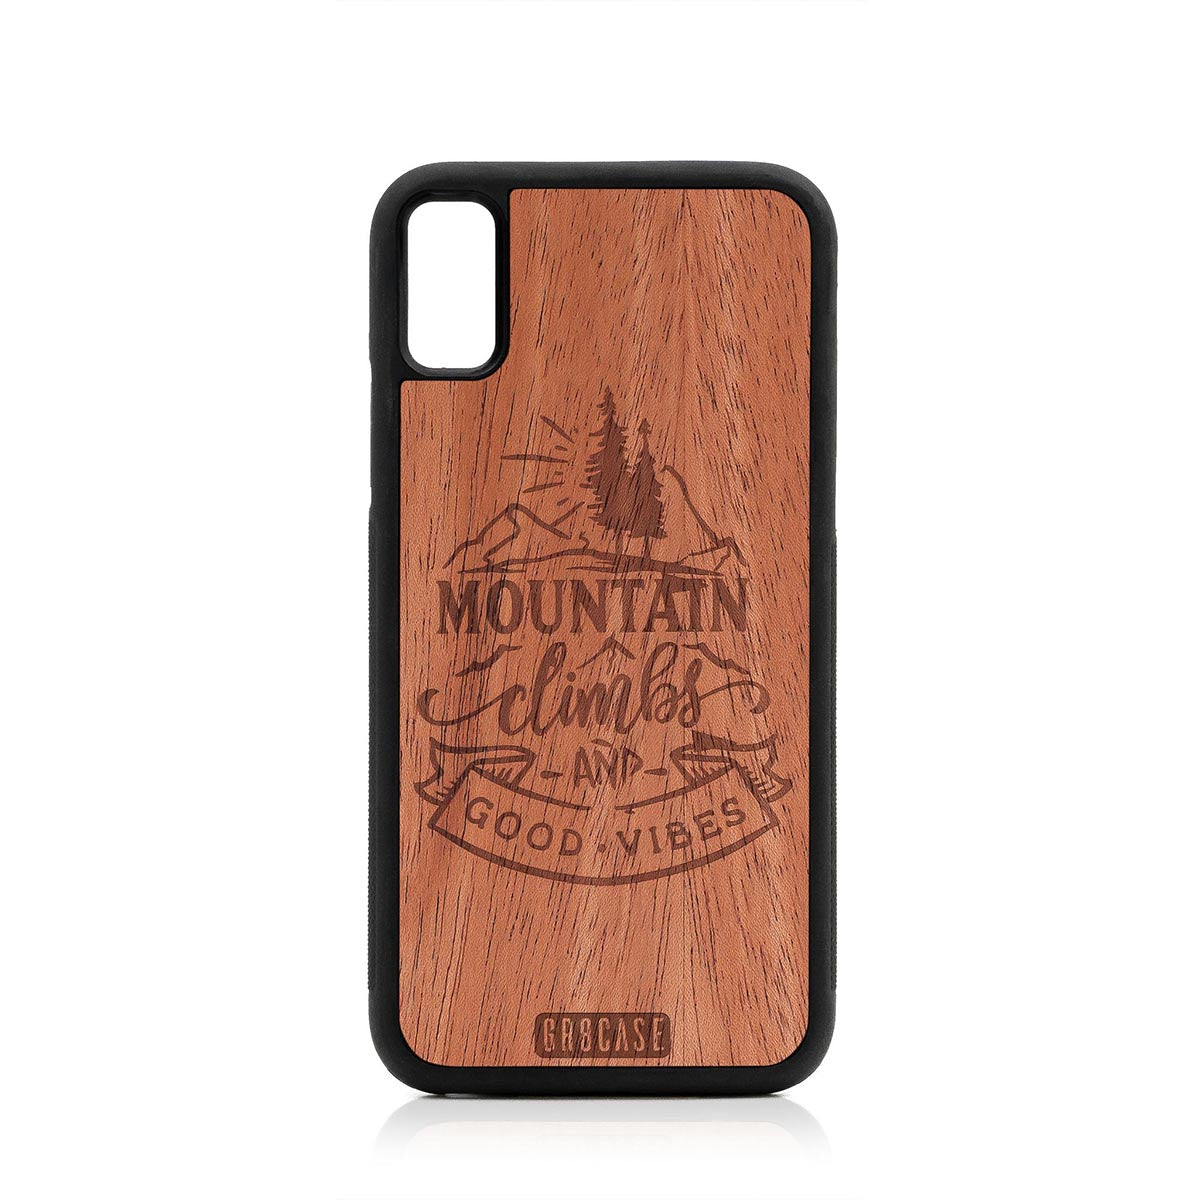 Mountain Climbs And Good Vibes Vibes Design Wood Case For iPhone X/XS by GR8CASE